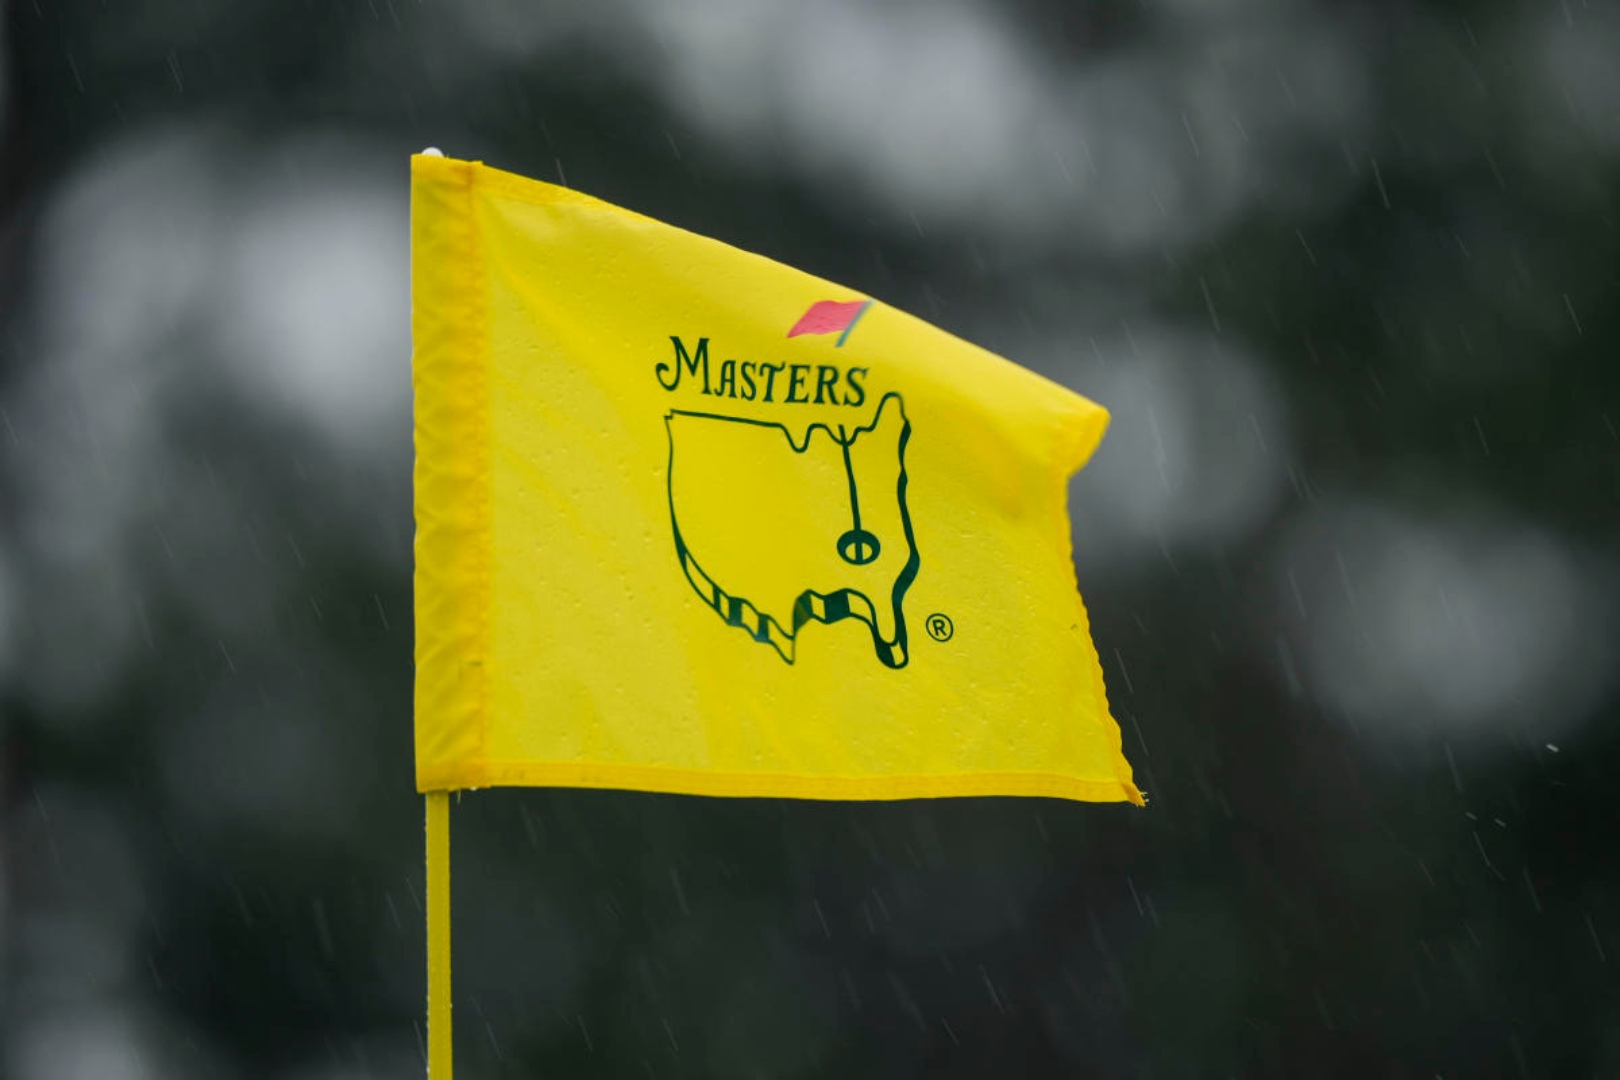 Where will the Masters take place in 2024? Fan Arch